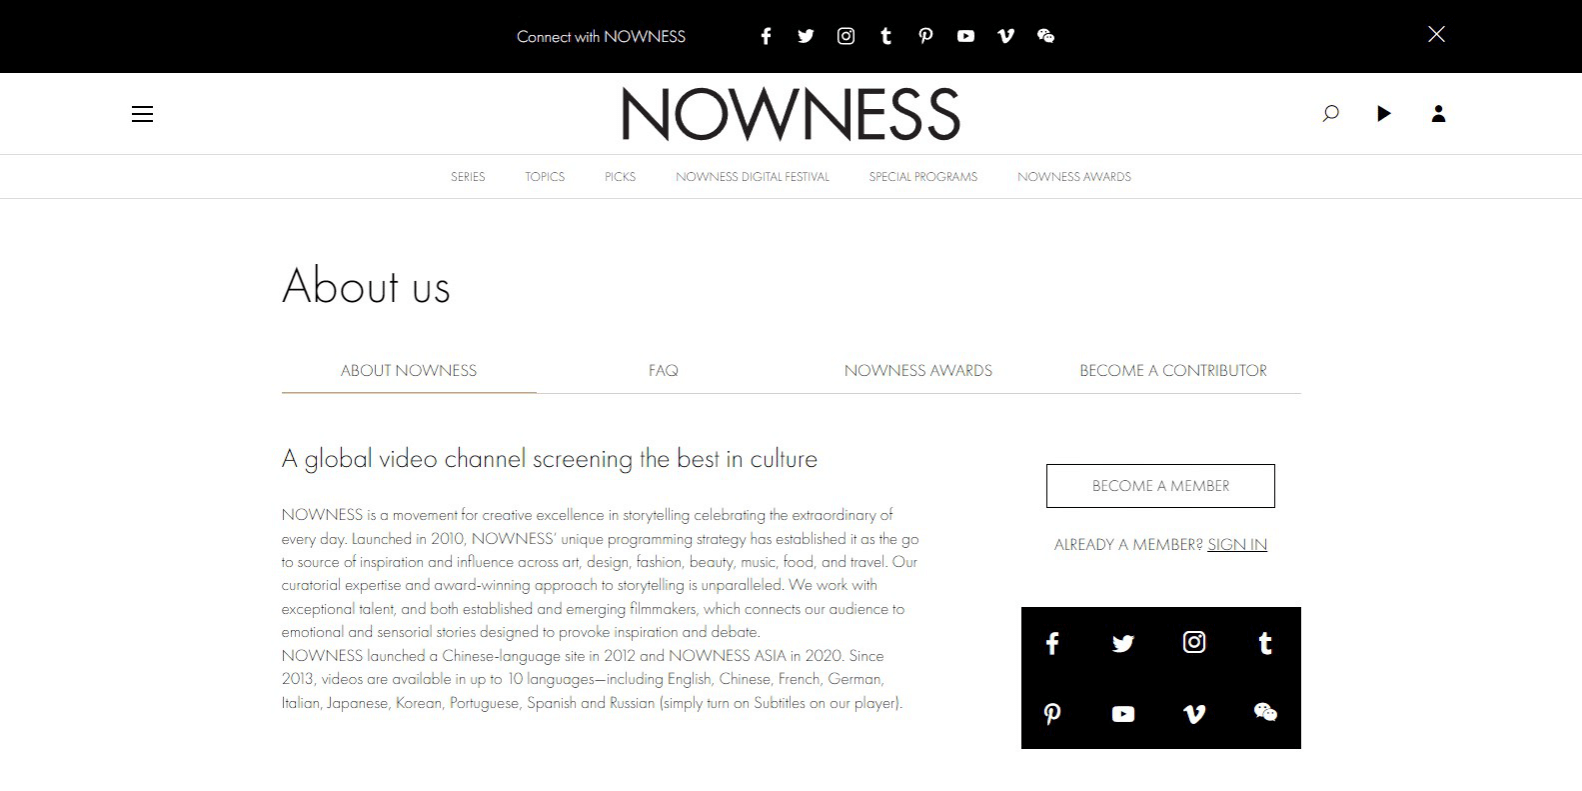 NOWNESS About Us page